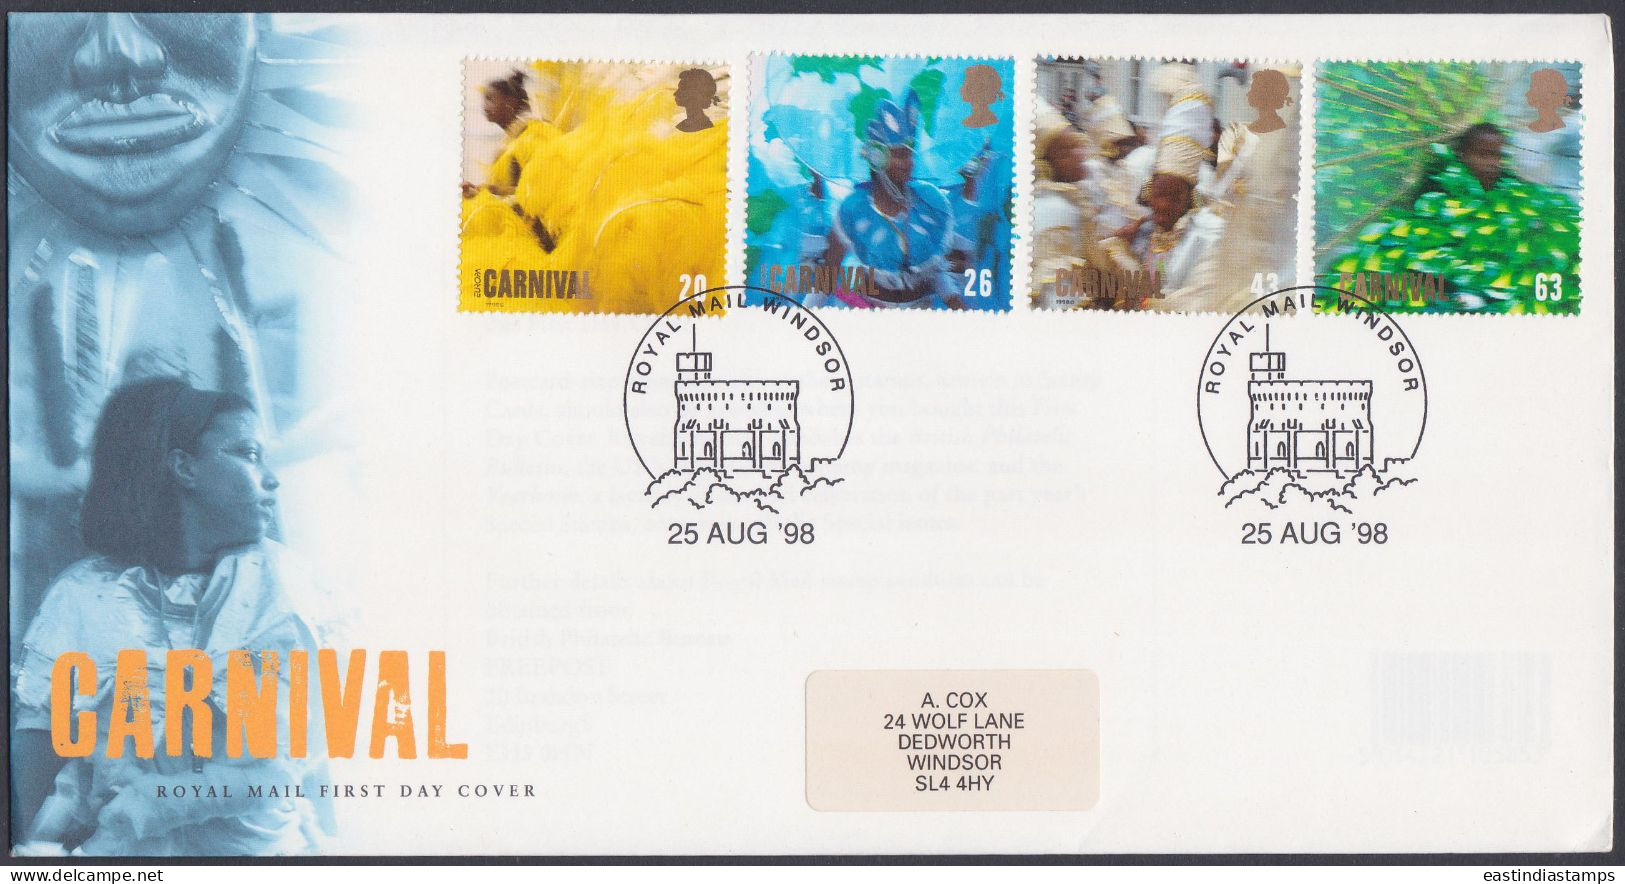 GB Great Britain 1998 FDC Carnival, Festival, Revelry, Music, Culture, Pictorial Postmark, First Day Cover - Briefe U. Dokumente